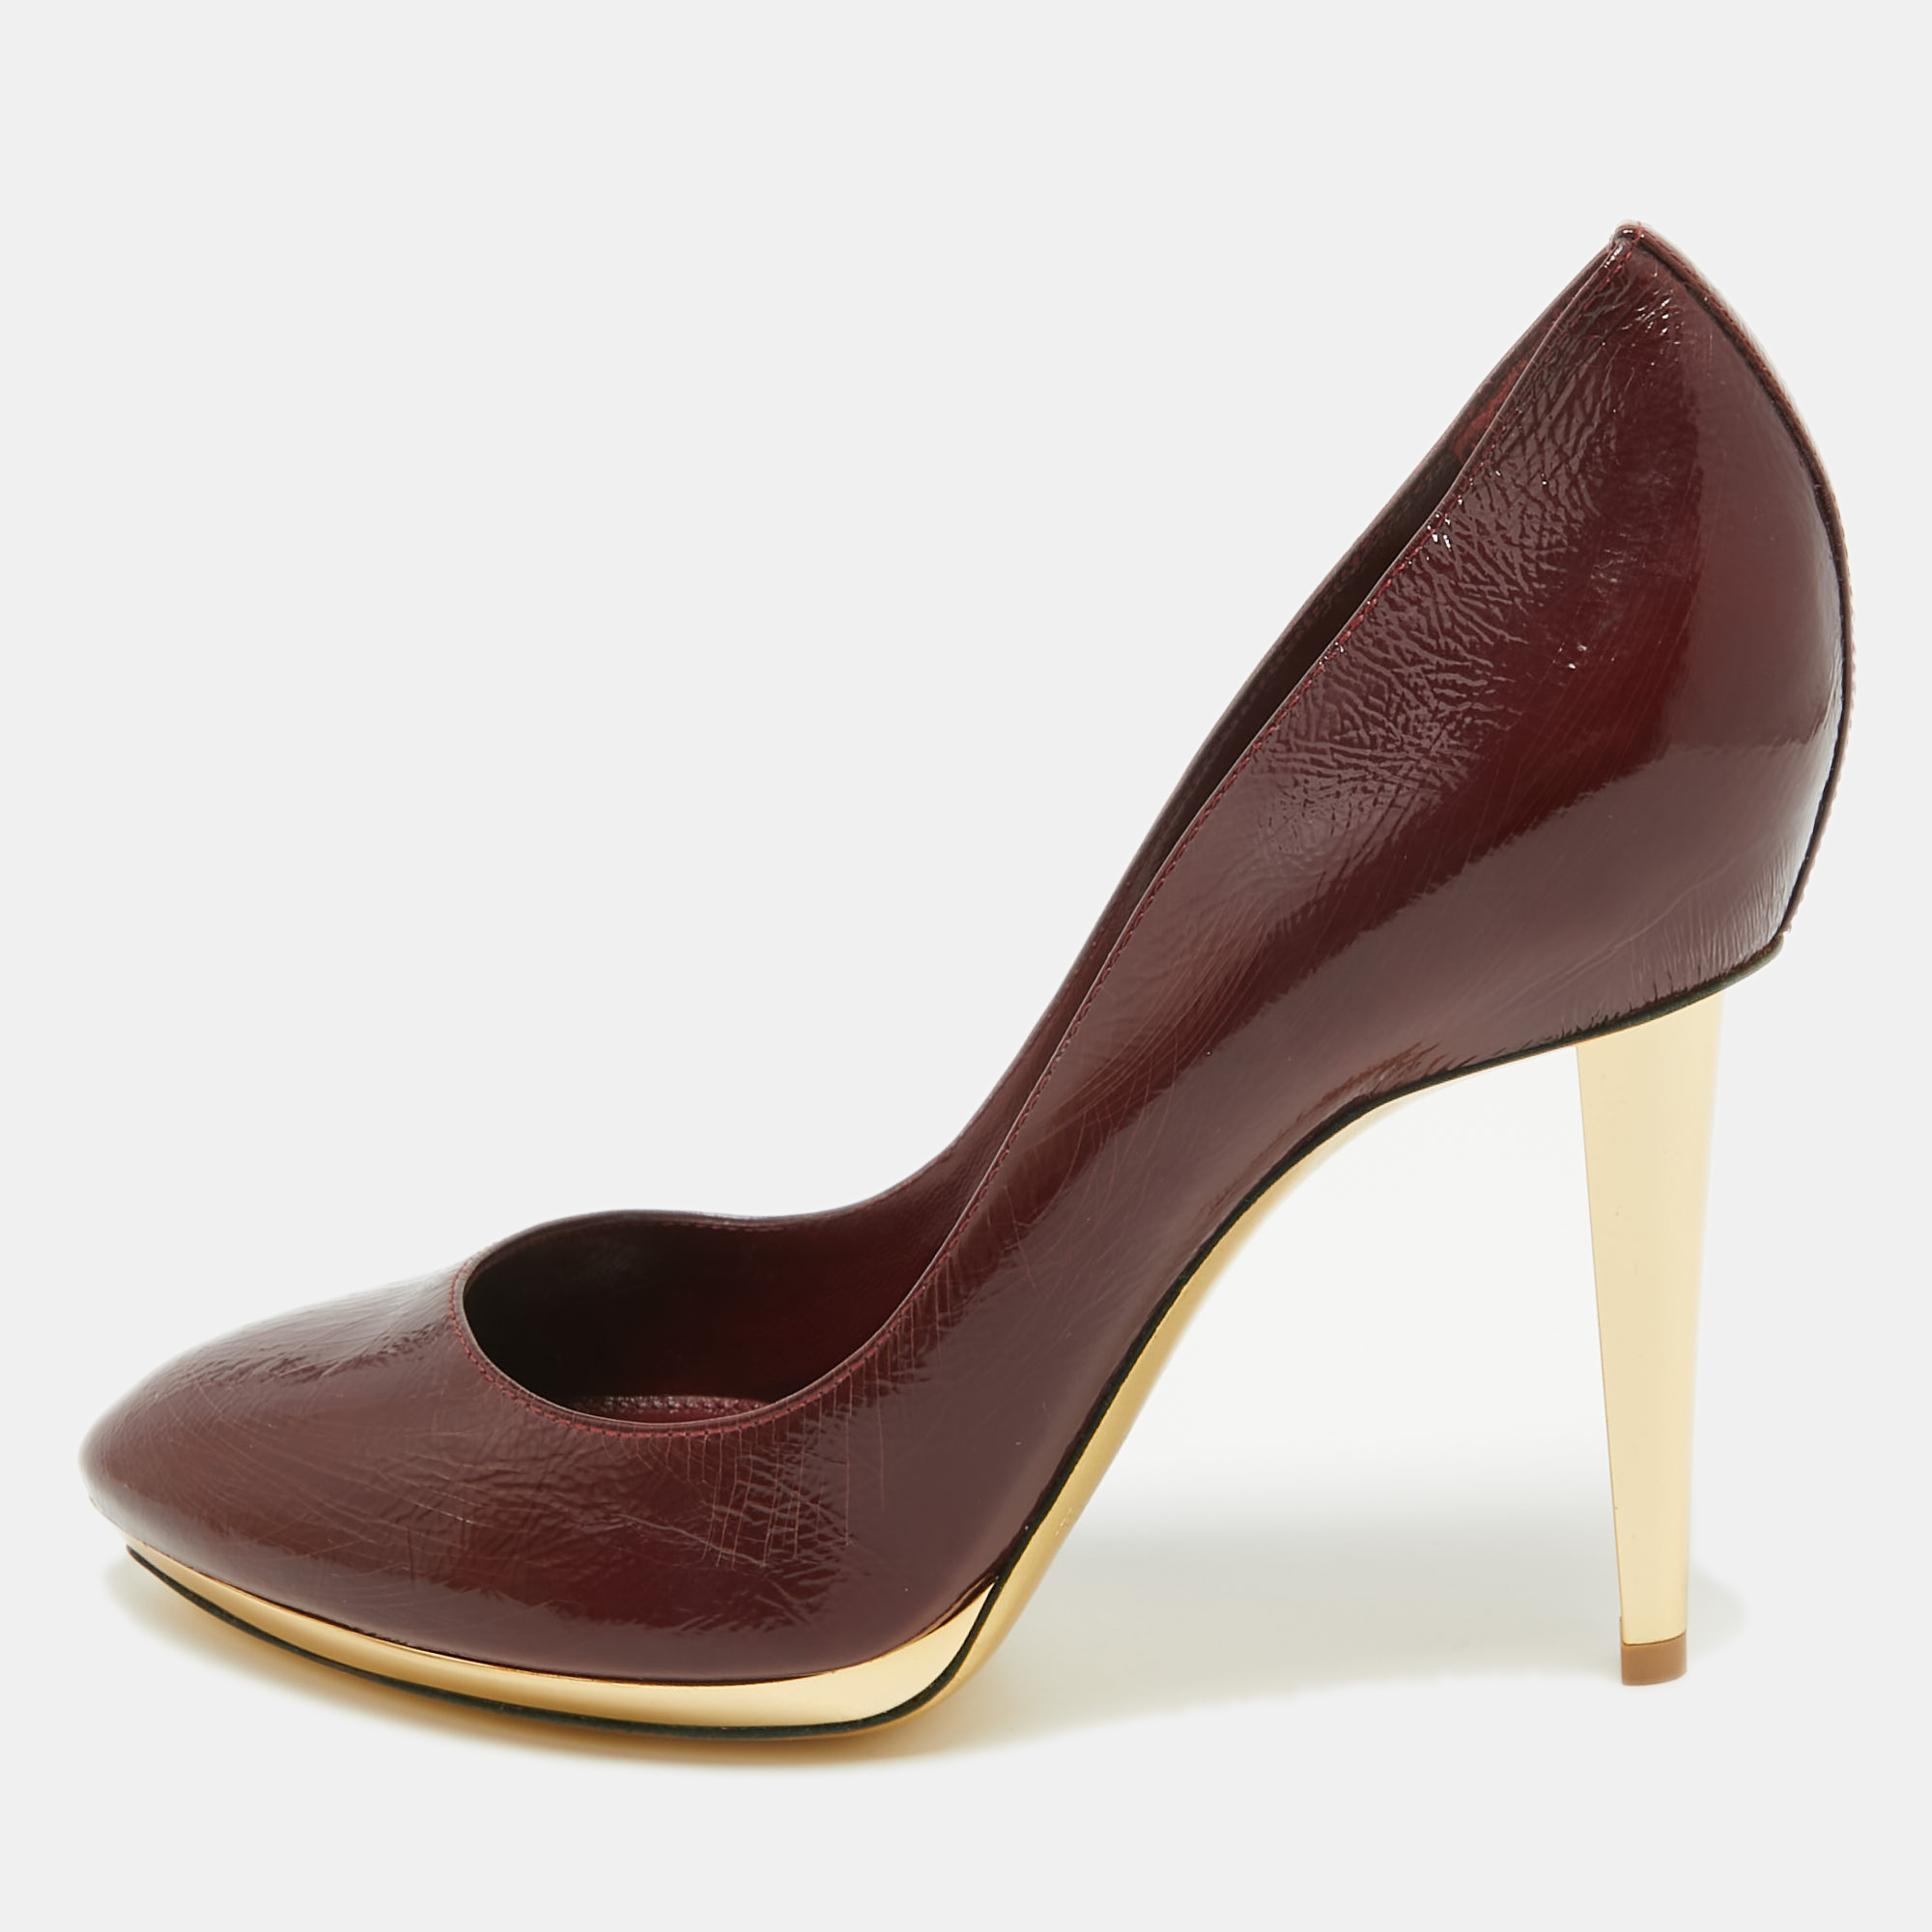 Pre-owned Sergio Rossi Burgundy Patent Leather Pointed Toe Pumps Size 40.5